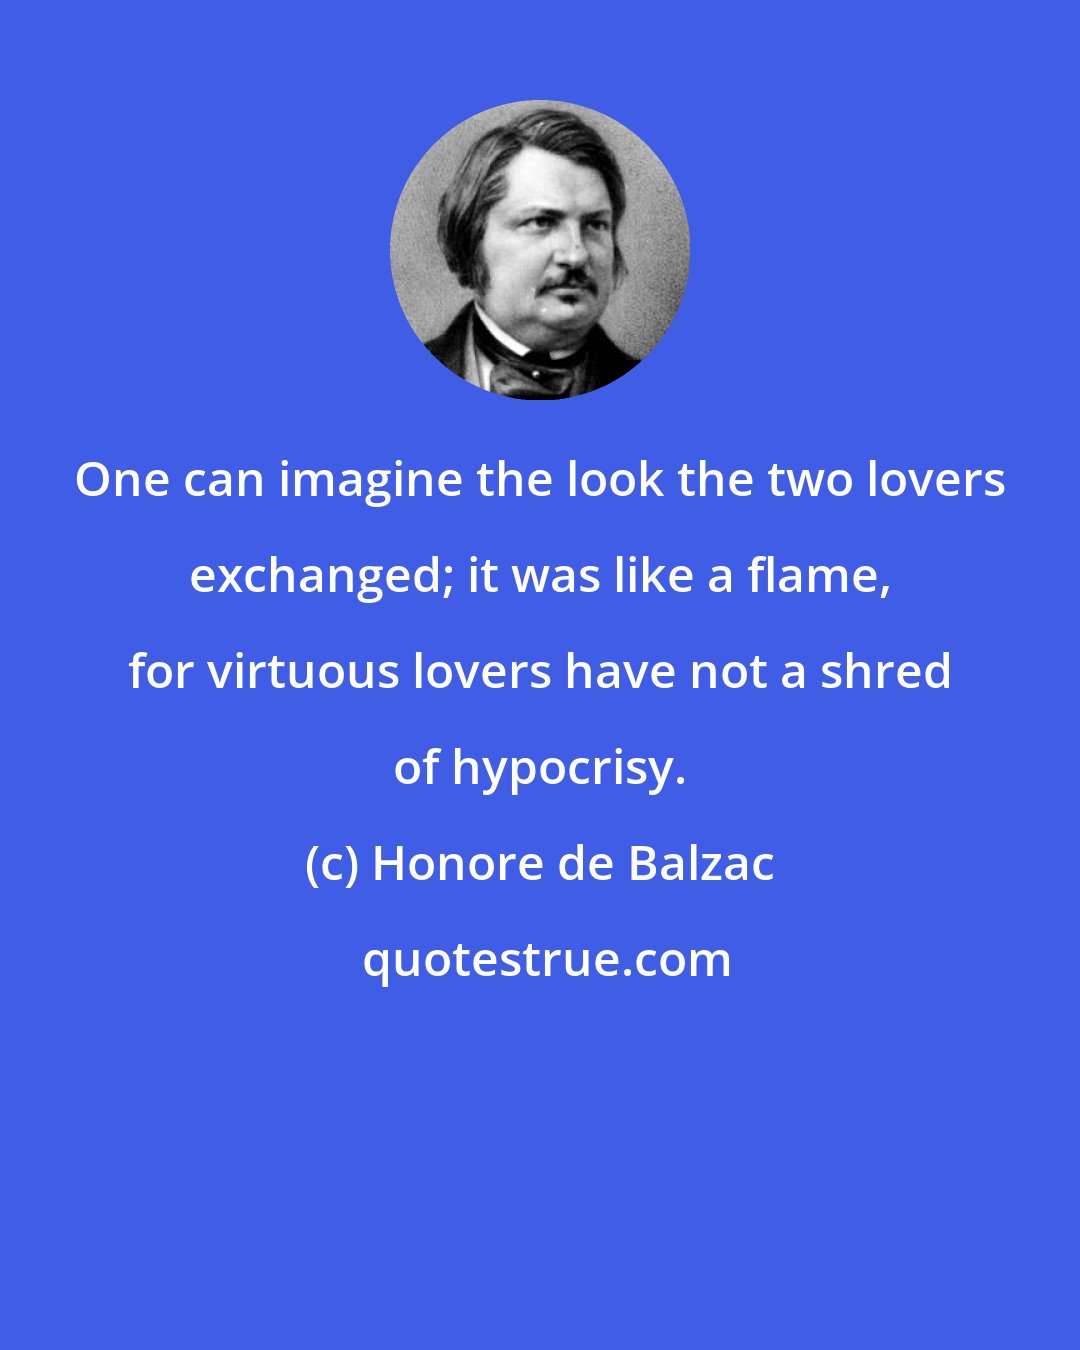 Honore de Balzac: One can imagine the look the two lovers exchanged; it was like a flame, for virtuous lovers have not a shred of hypocrisy.